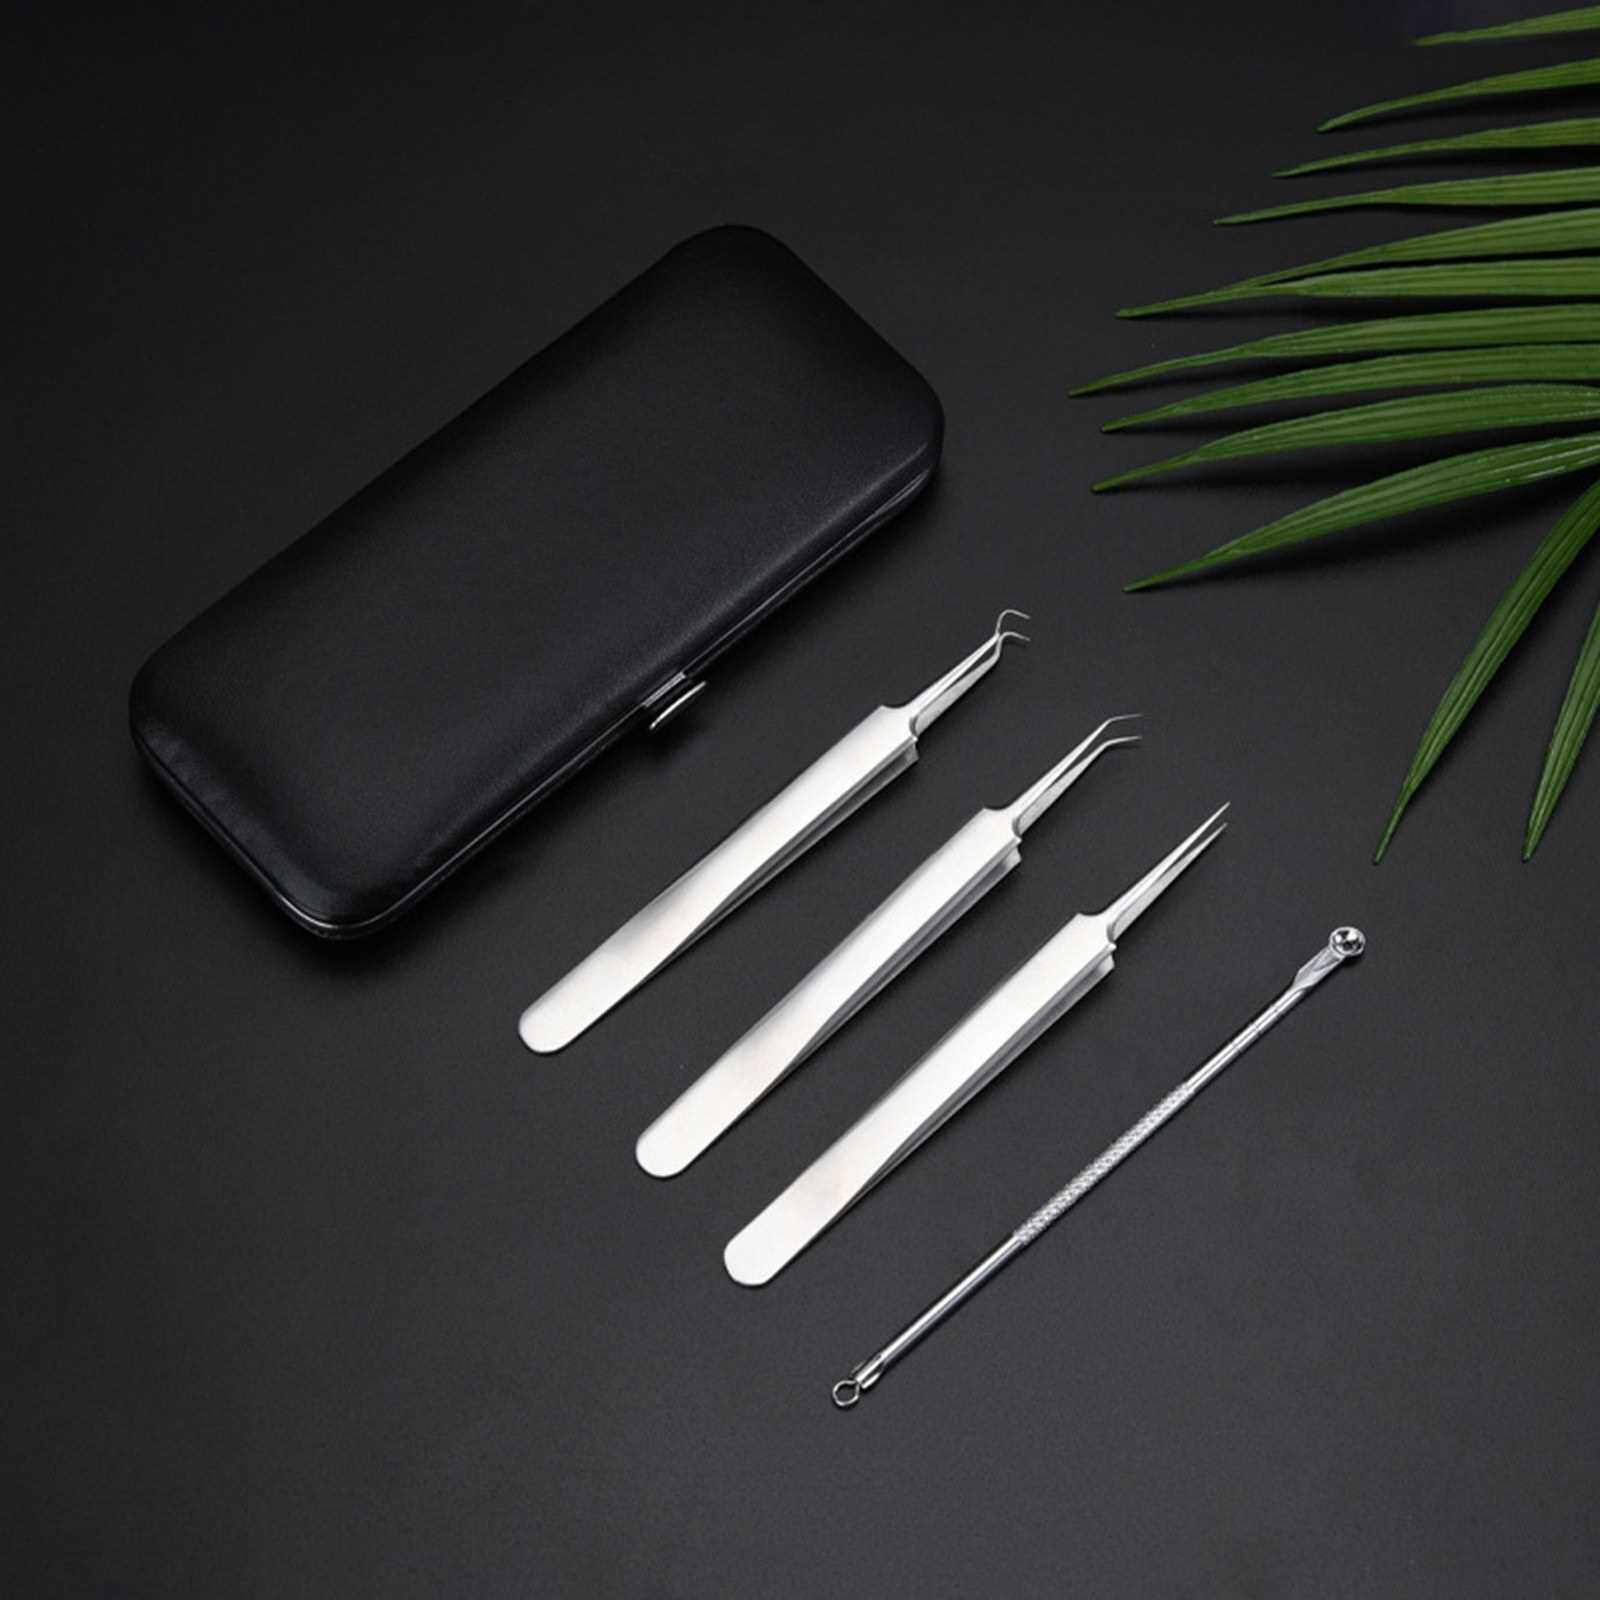 BEST SELLER 4Pcs Blackhead Remover Kit Acne Comedone Pimple Extractor Pimple Cleaner Tool Blackhead Tweezers Extractor with Storage Case (Standard)